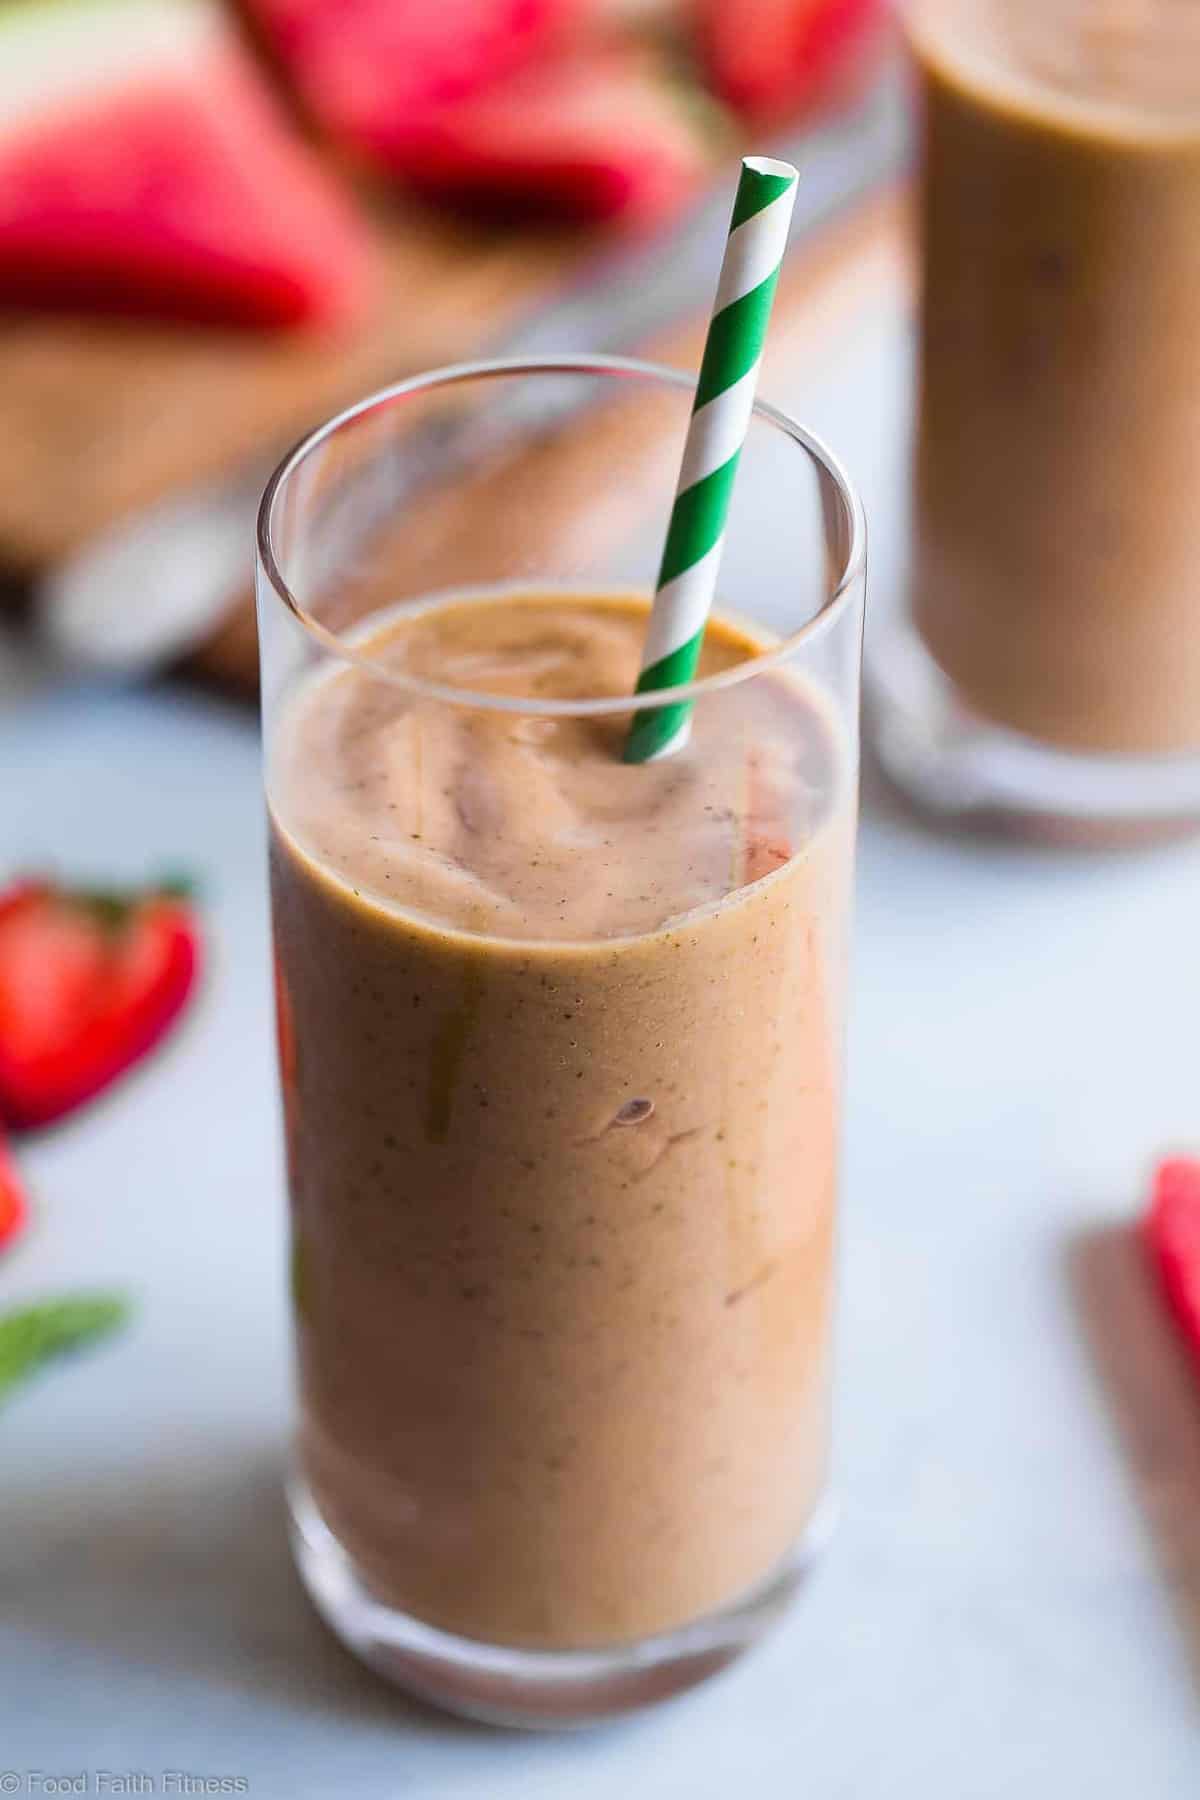 Healthy Strawberry Watermelon Smoothie - This fresh, CREAMY Healthy Summer Smoothie is a DELICIOUS way to start the day! Paleo and vegan friendly and made with clean ingredients that even kids will love! | #Foodfaithfitness | #Vegan #Paleo #DairyFree #Cleaneating #Smoothie